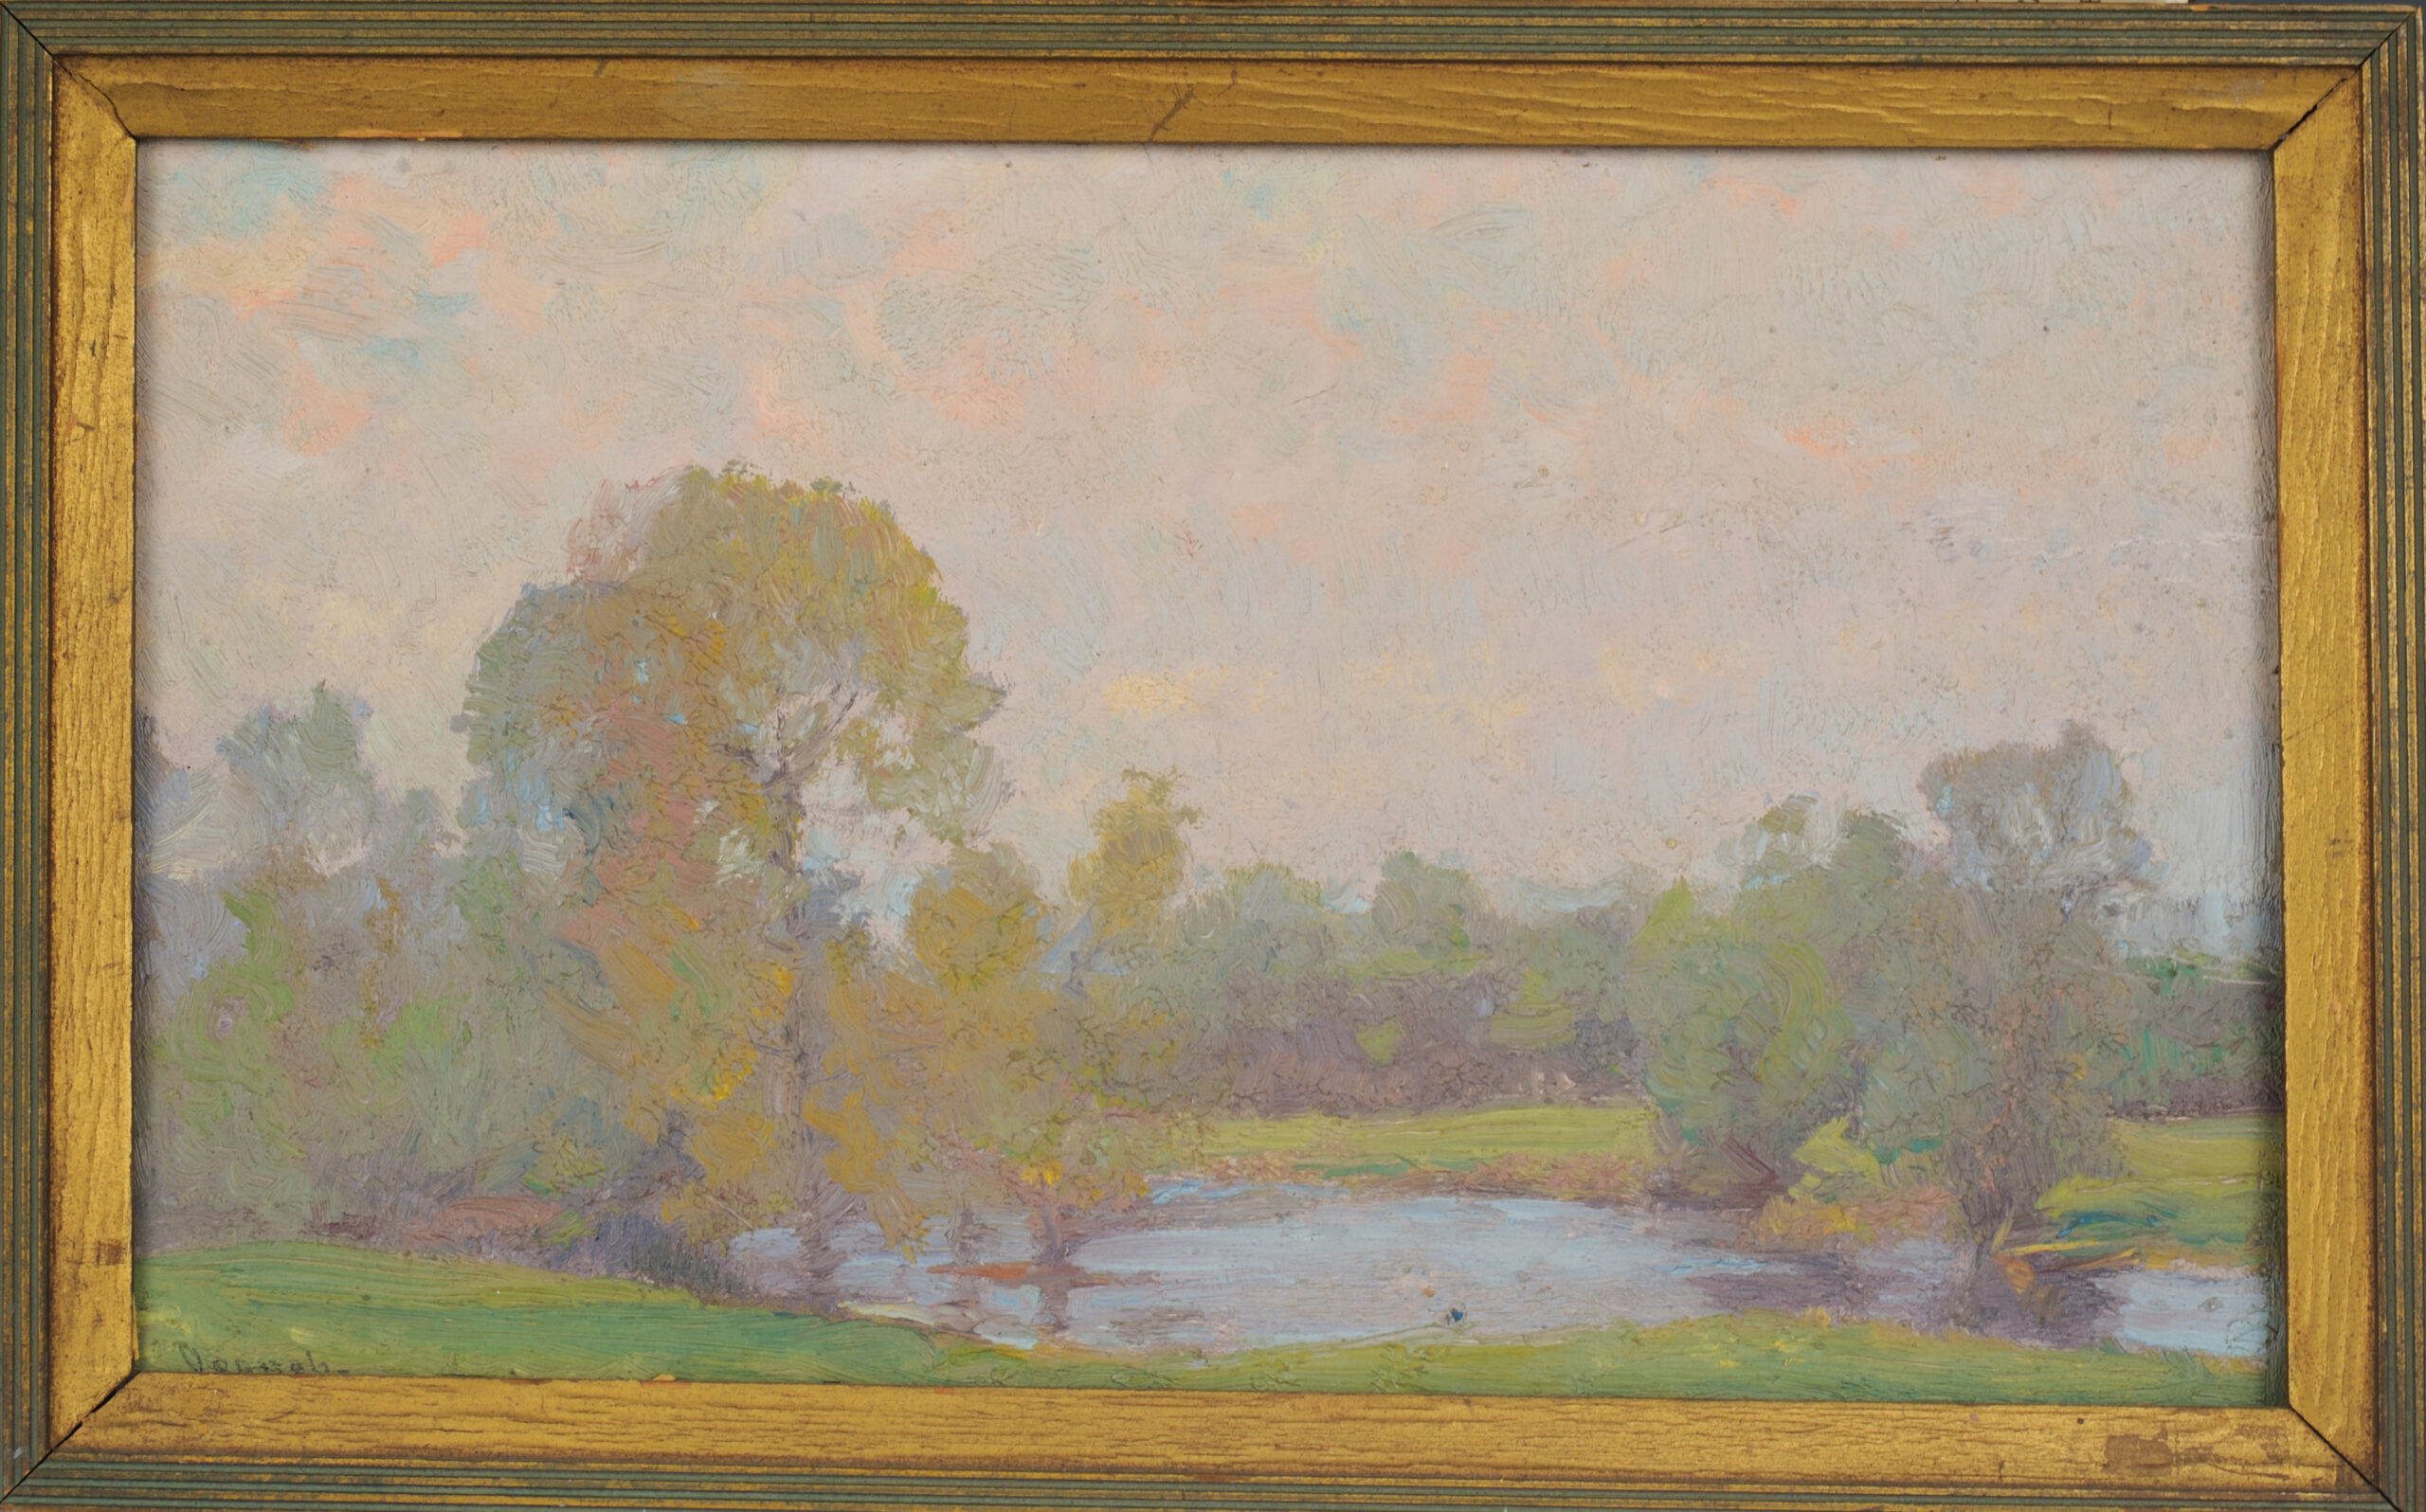 Landscape painting of trees and pond, Vonnoh, R. 1913.